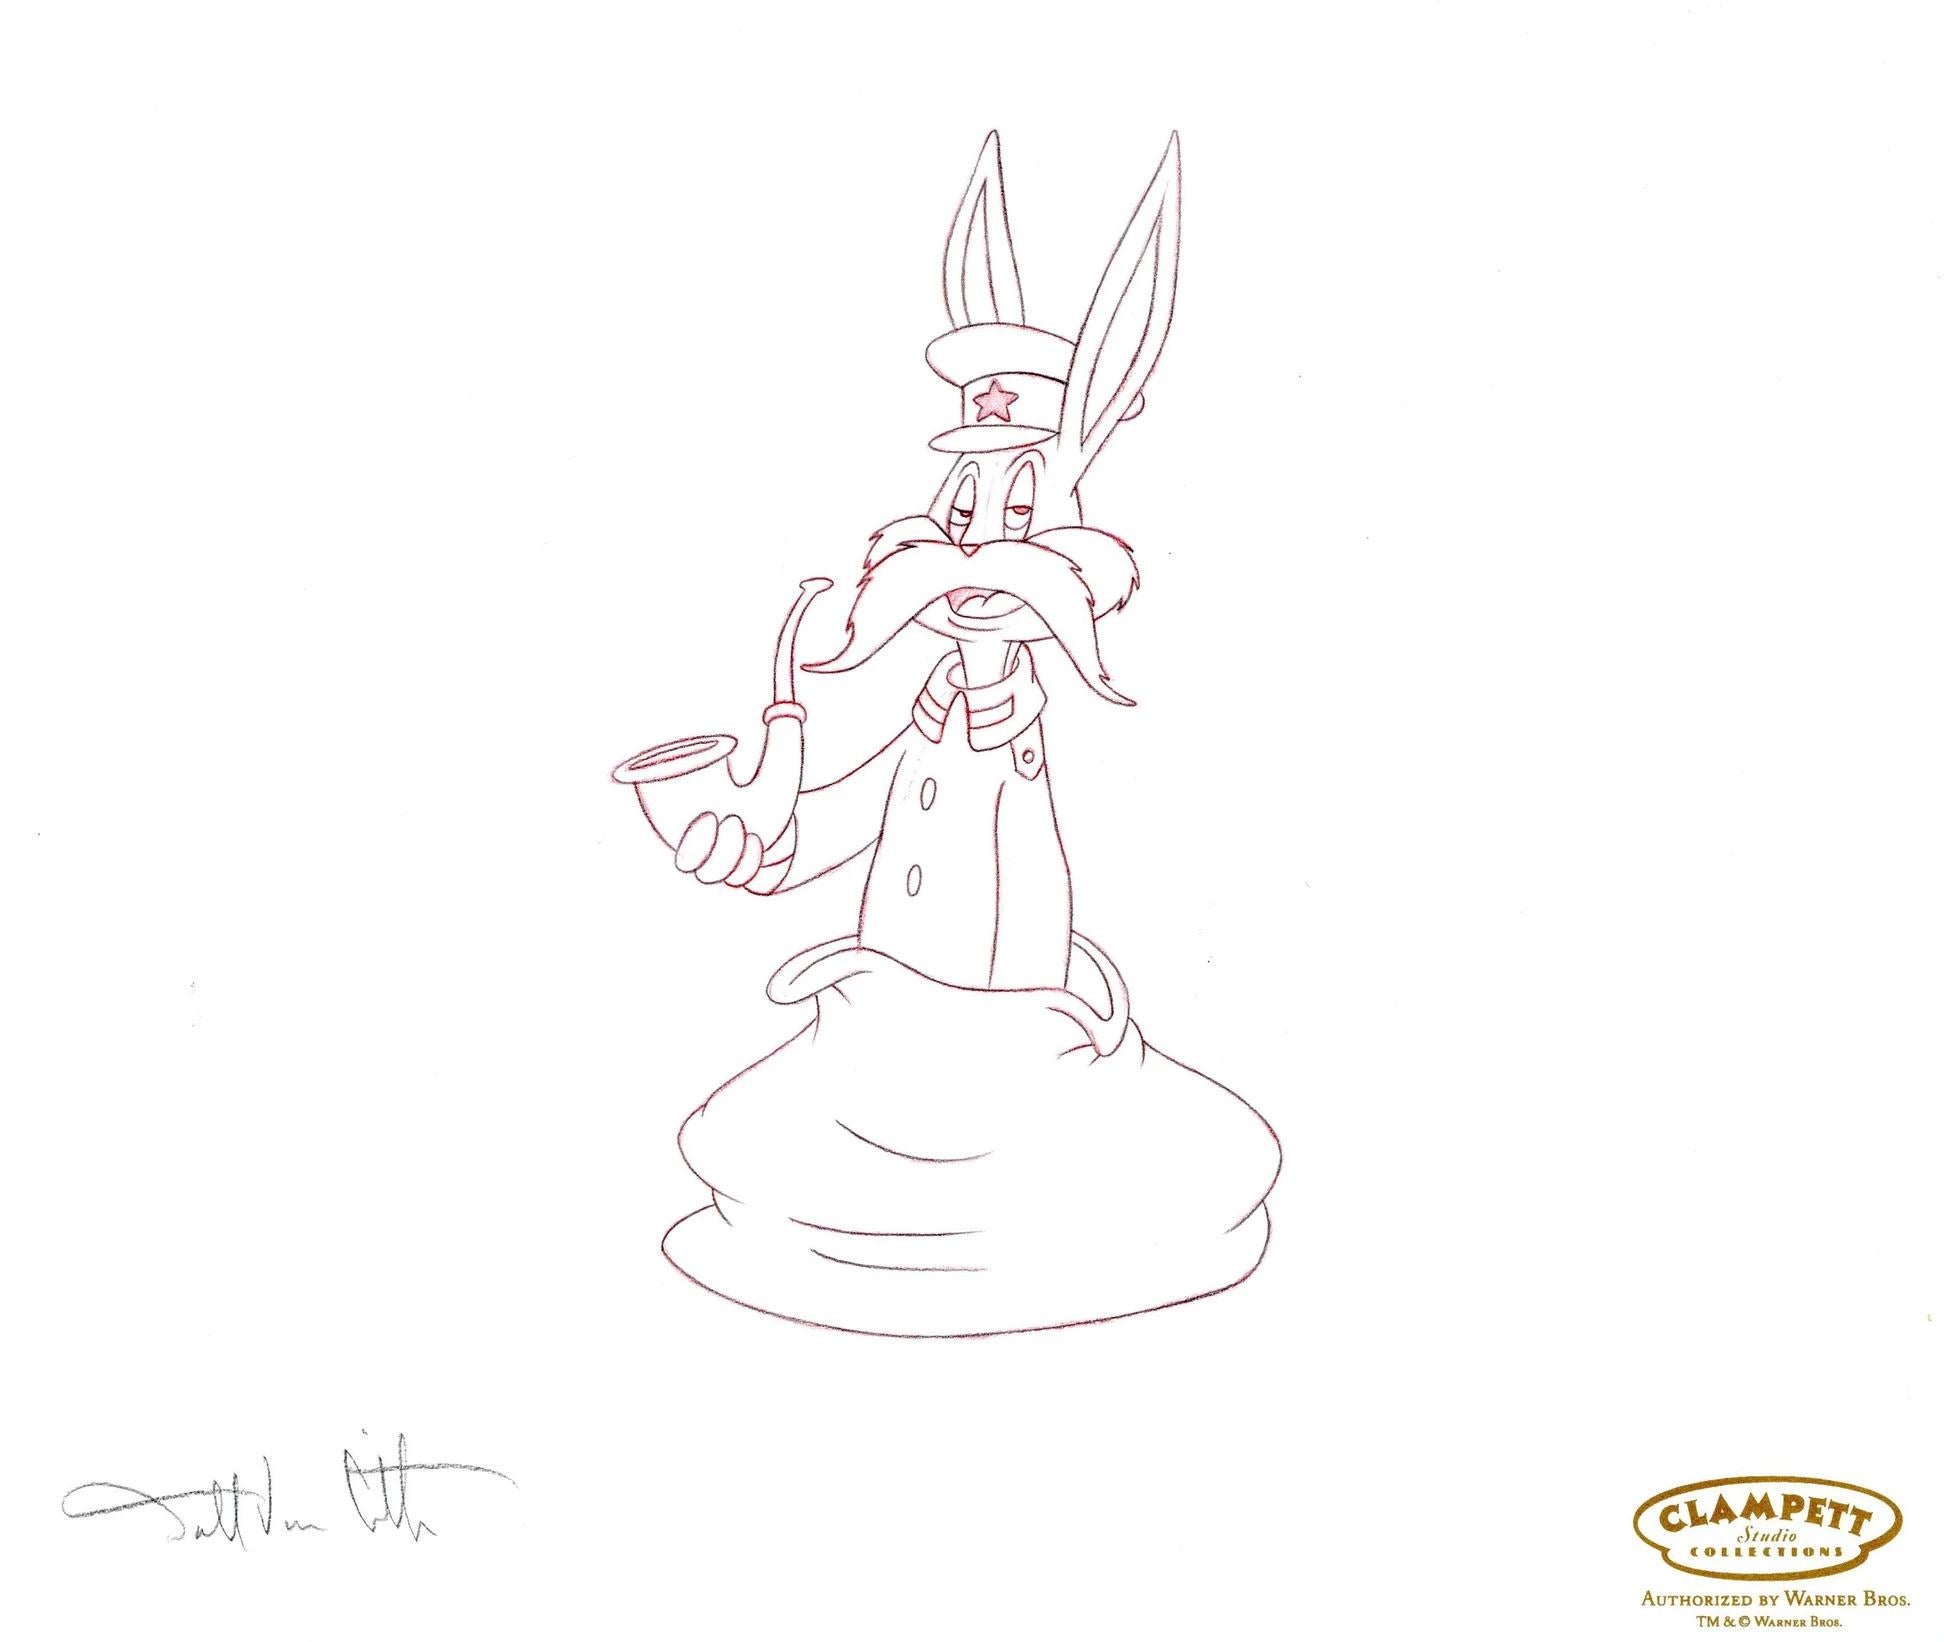 Looney Tunes Original Production Drawing signed Darrell Van Citters: Bugs Bunny - Art by Looney Tunes Studio Artists